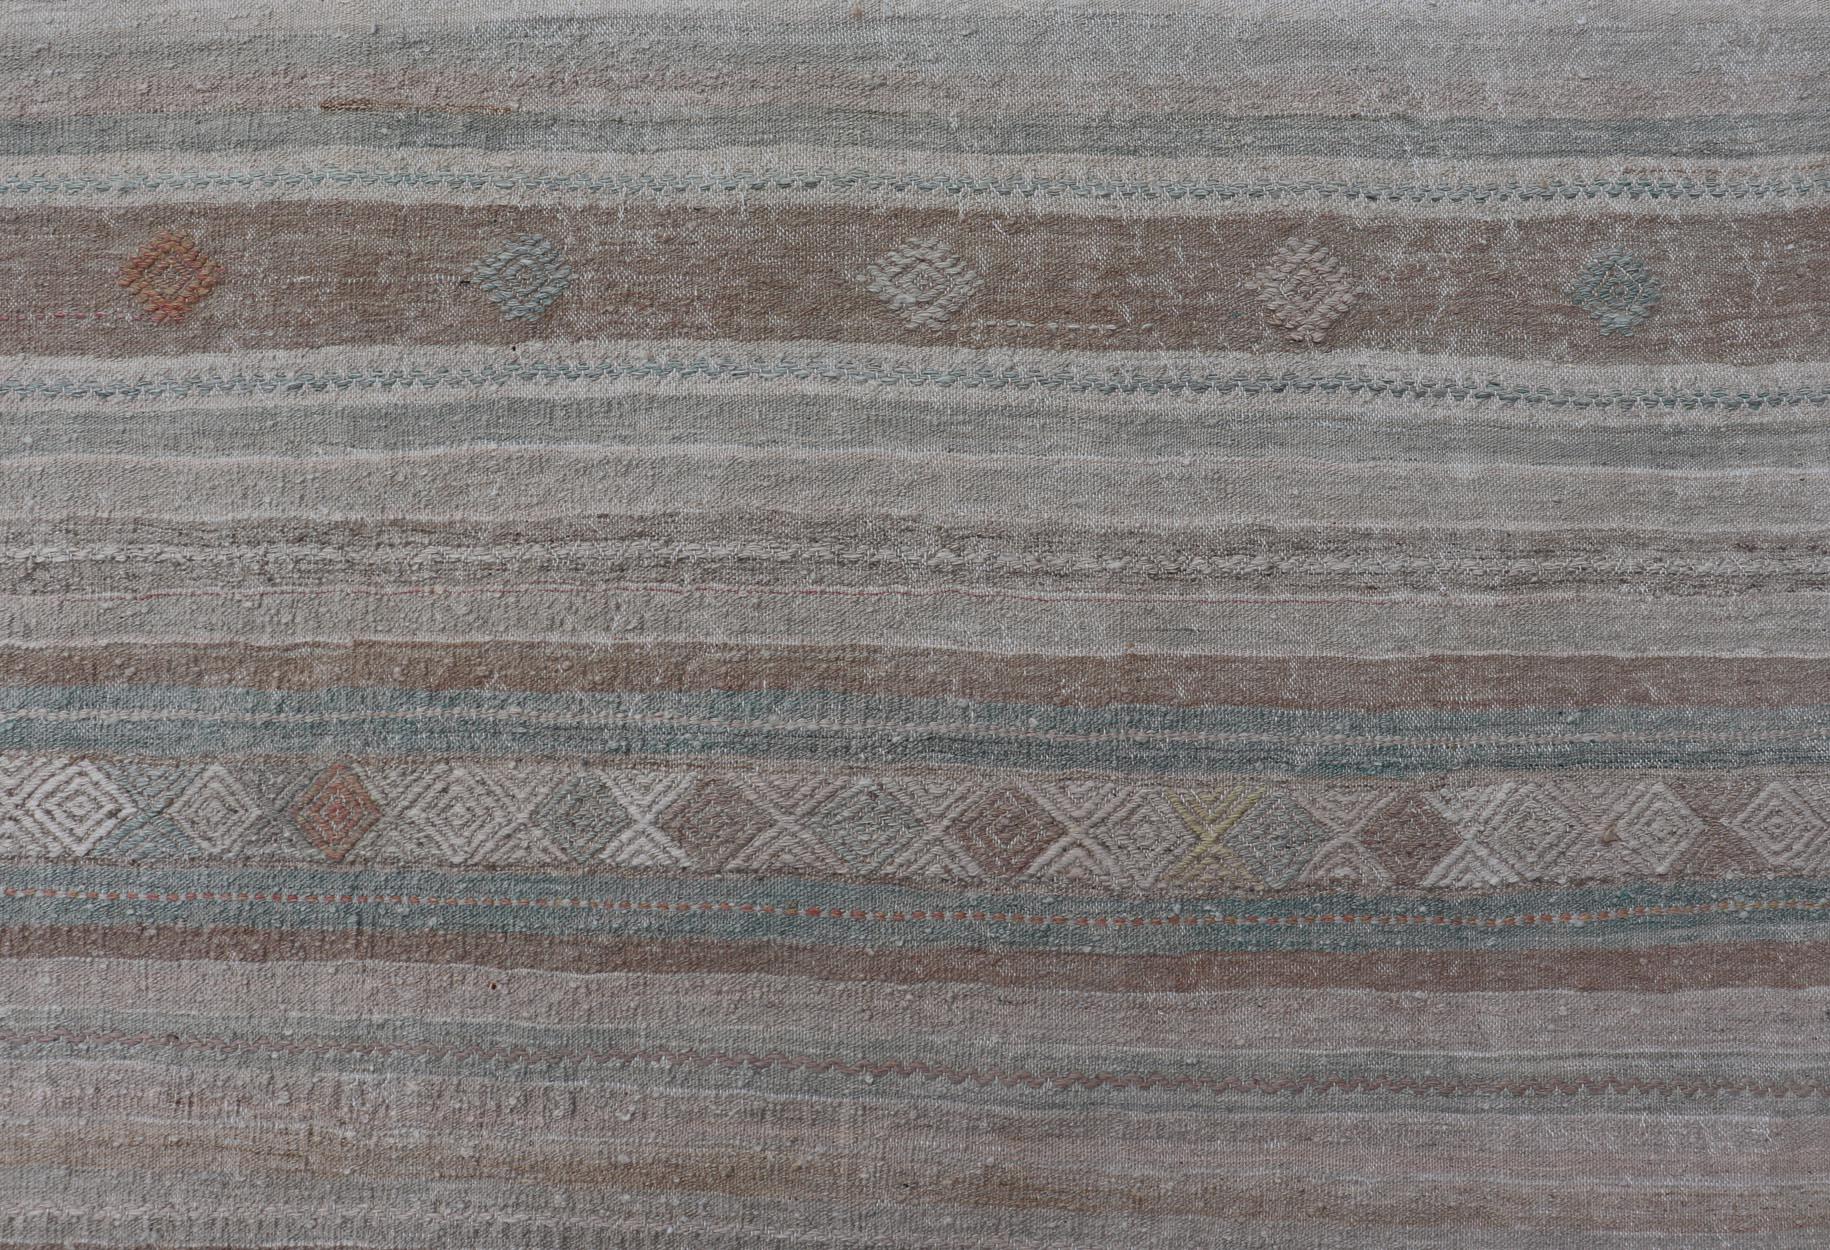 Wool Turkish Flat-Weave Kilim with Embroideries in Taupe, Tan, Light Green, and Grey For Sale